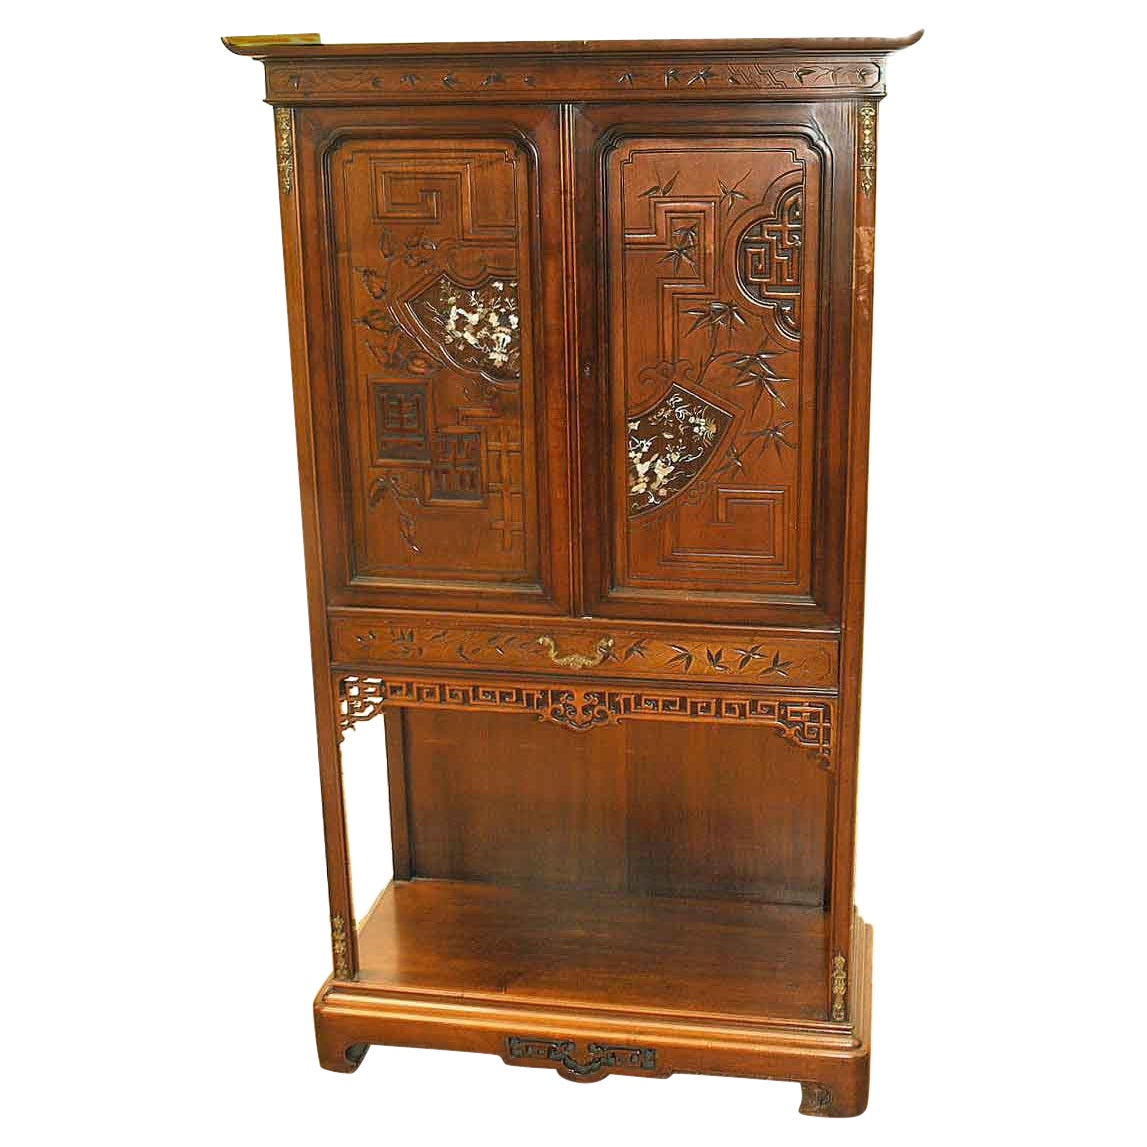 Carved Japanese Inlaid Cabinet